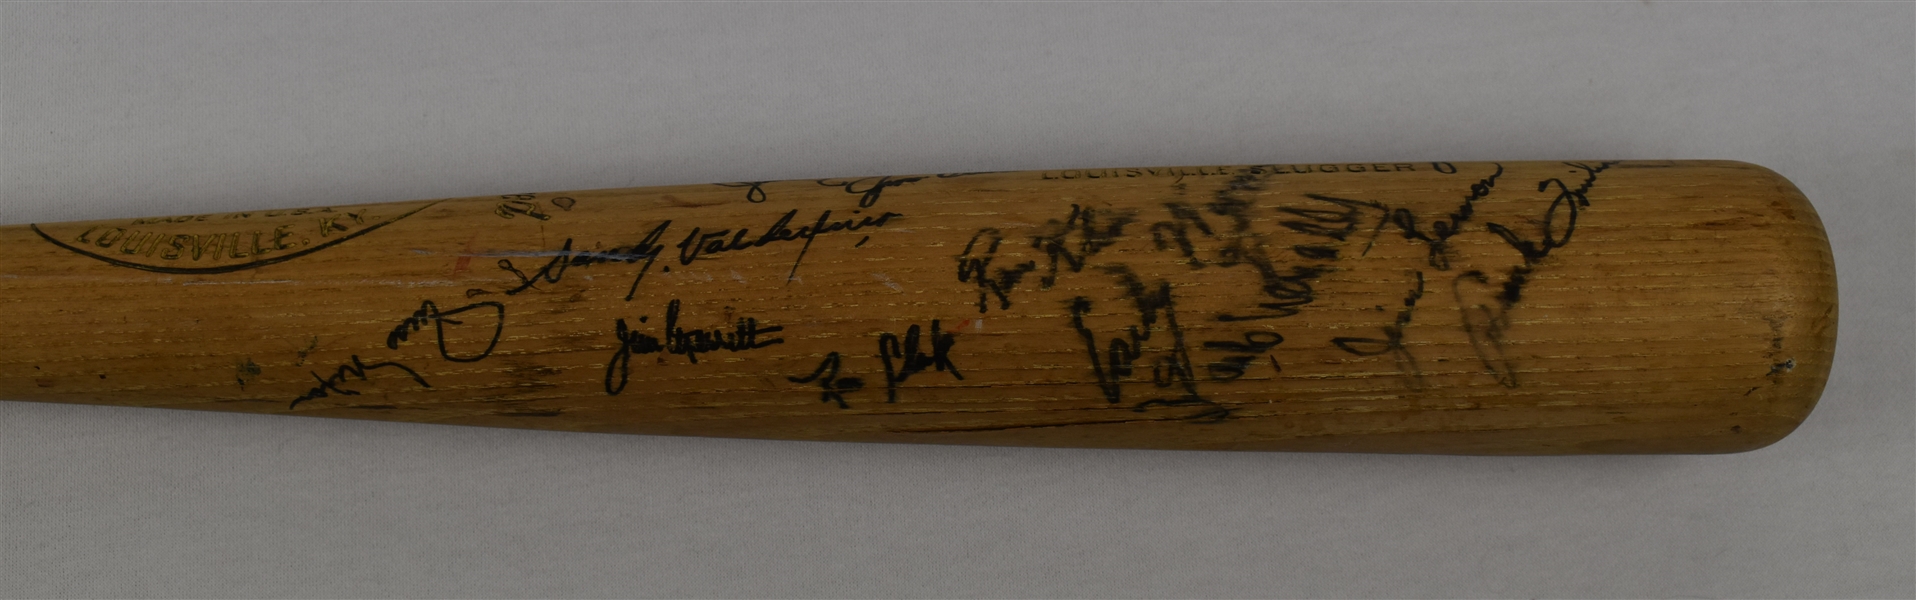 Rich Reese 1967 Minnesota Twins Game Used Bat/Signed by 1967 Twins